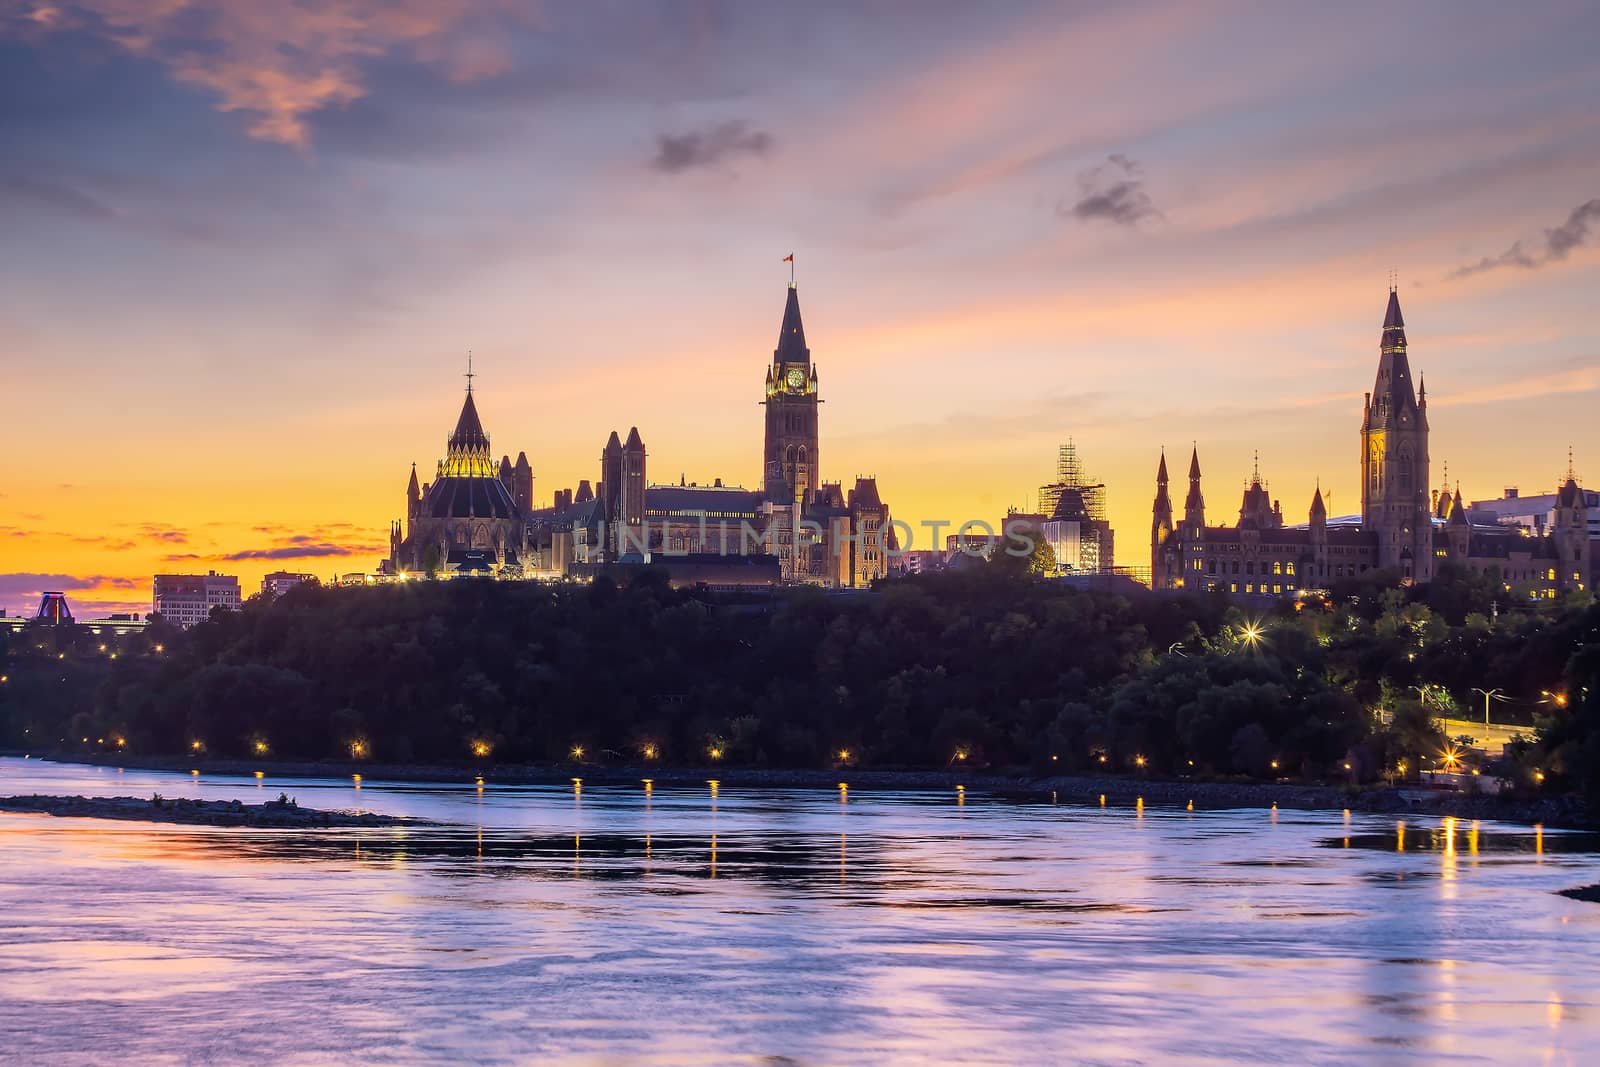 Parliament Hill in Ottawa, Ontario, Canada by f11photo